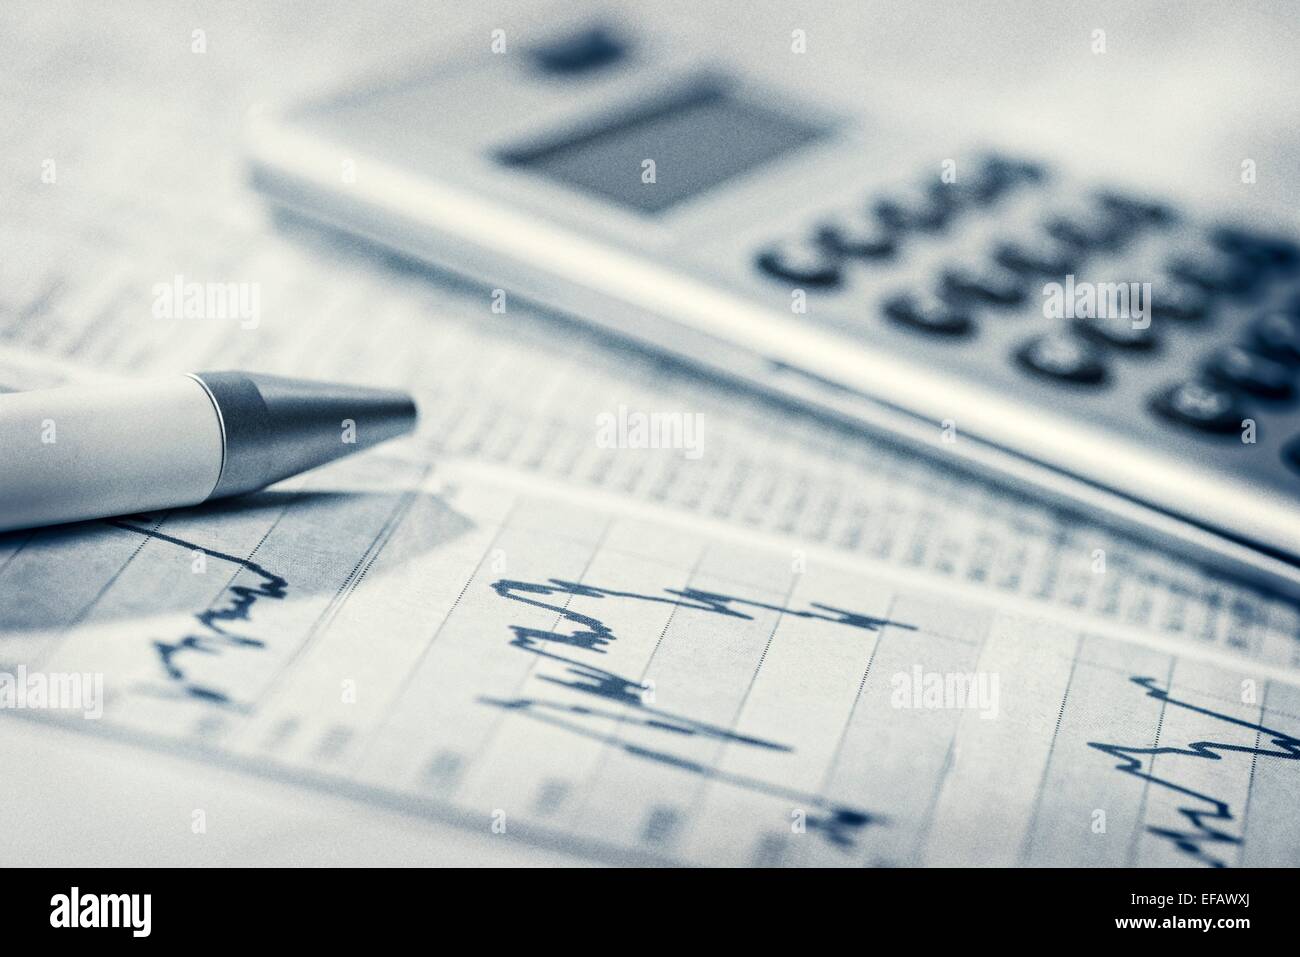 Diagrams with market prices, exchange rate tables, pen and calculator. January 2015. Stock Photo